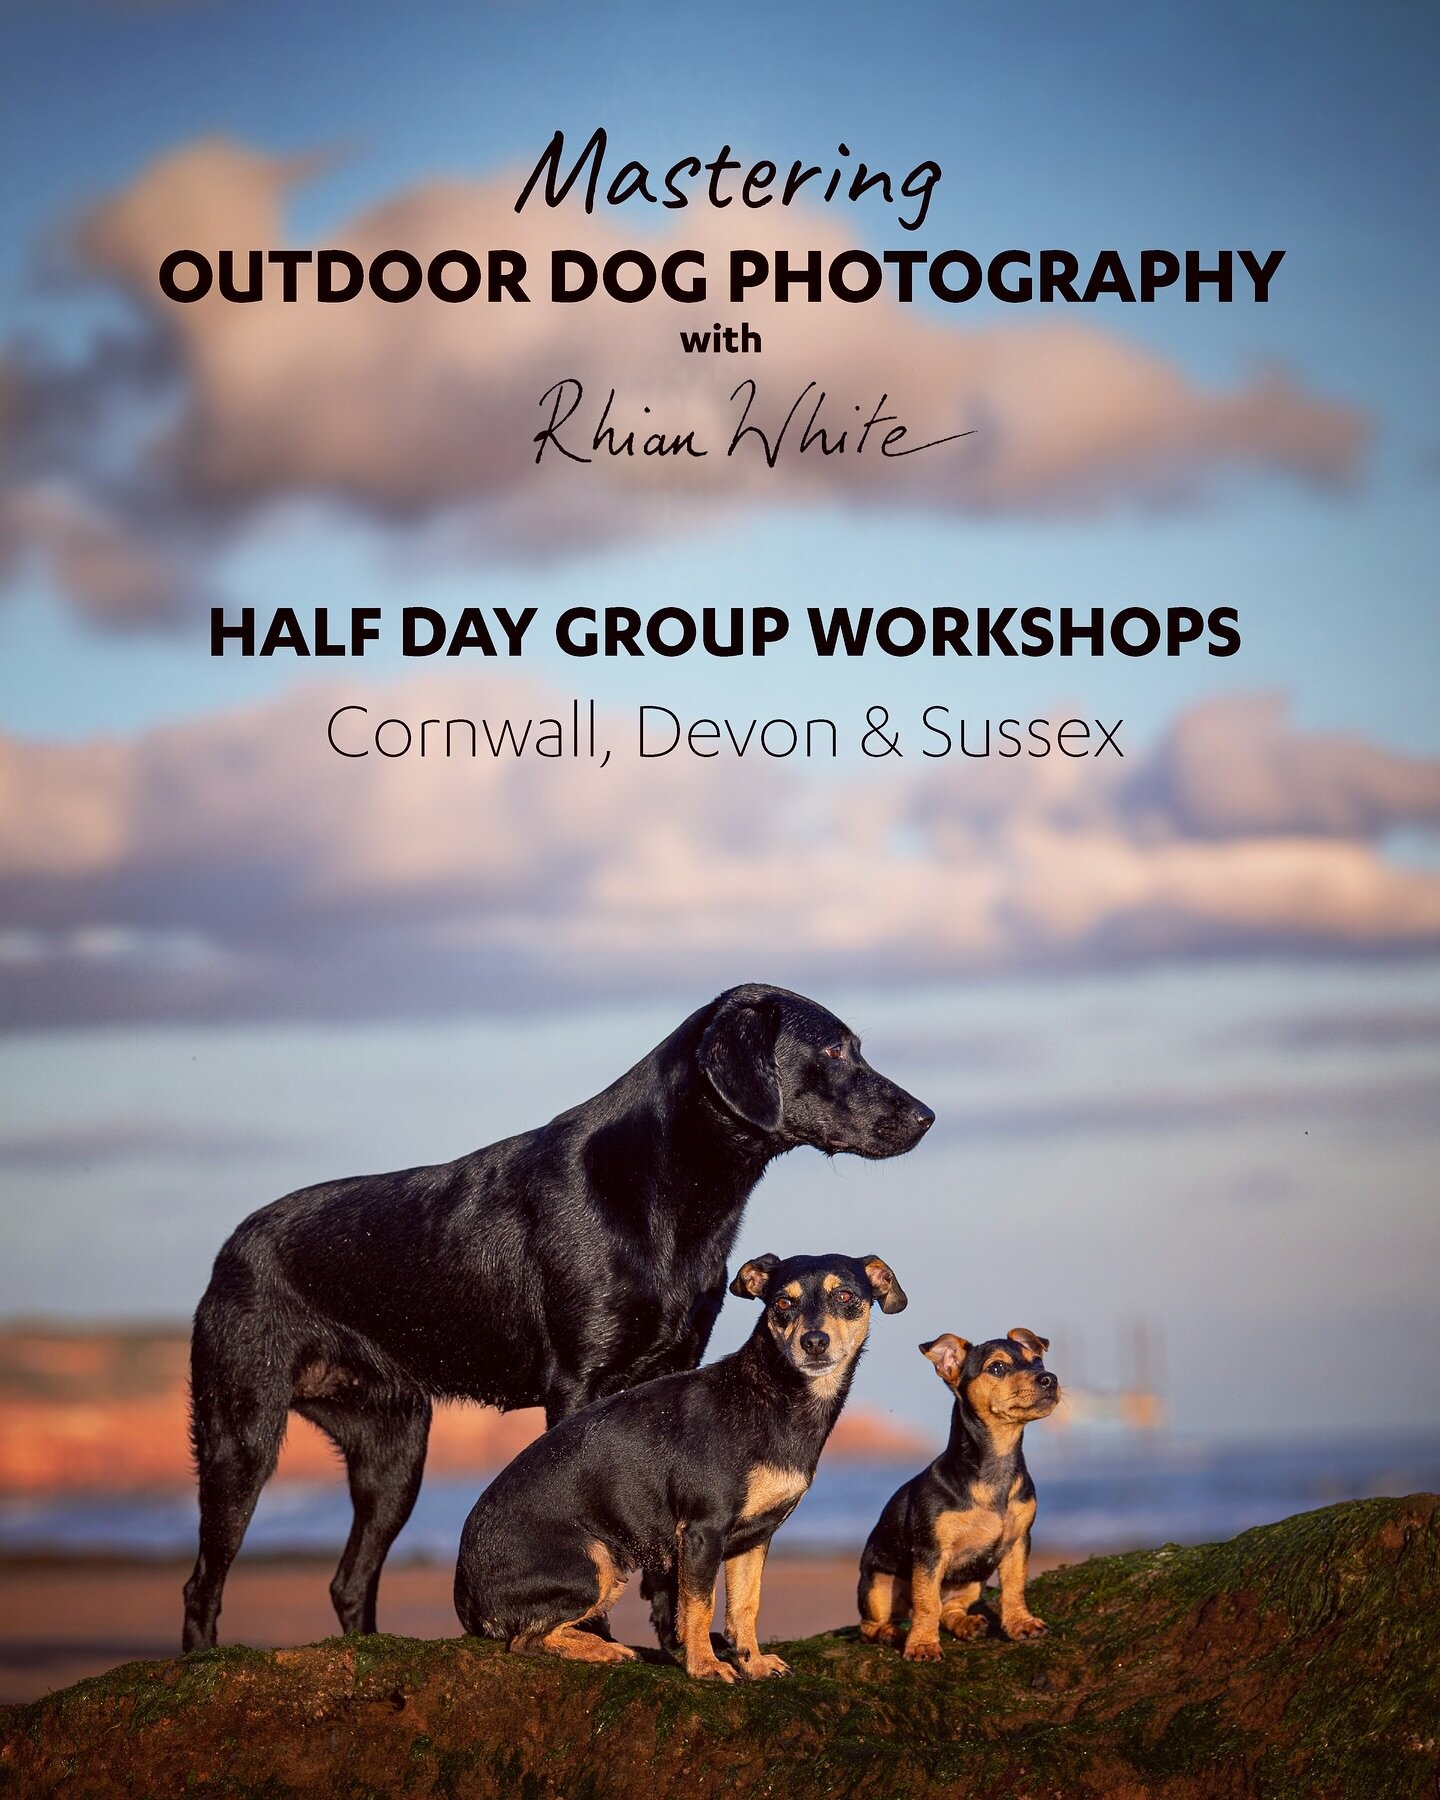 Do you find it hard photographing your dog? Fancy spending an afternoon with me and a few fellow dog photography enthusiasts and learning some new skills? You can also bring your dog if you would like to and come to a fun, informative and relaxed on-